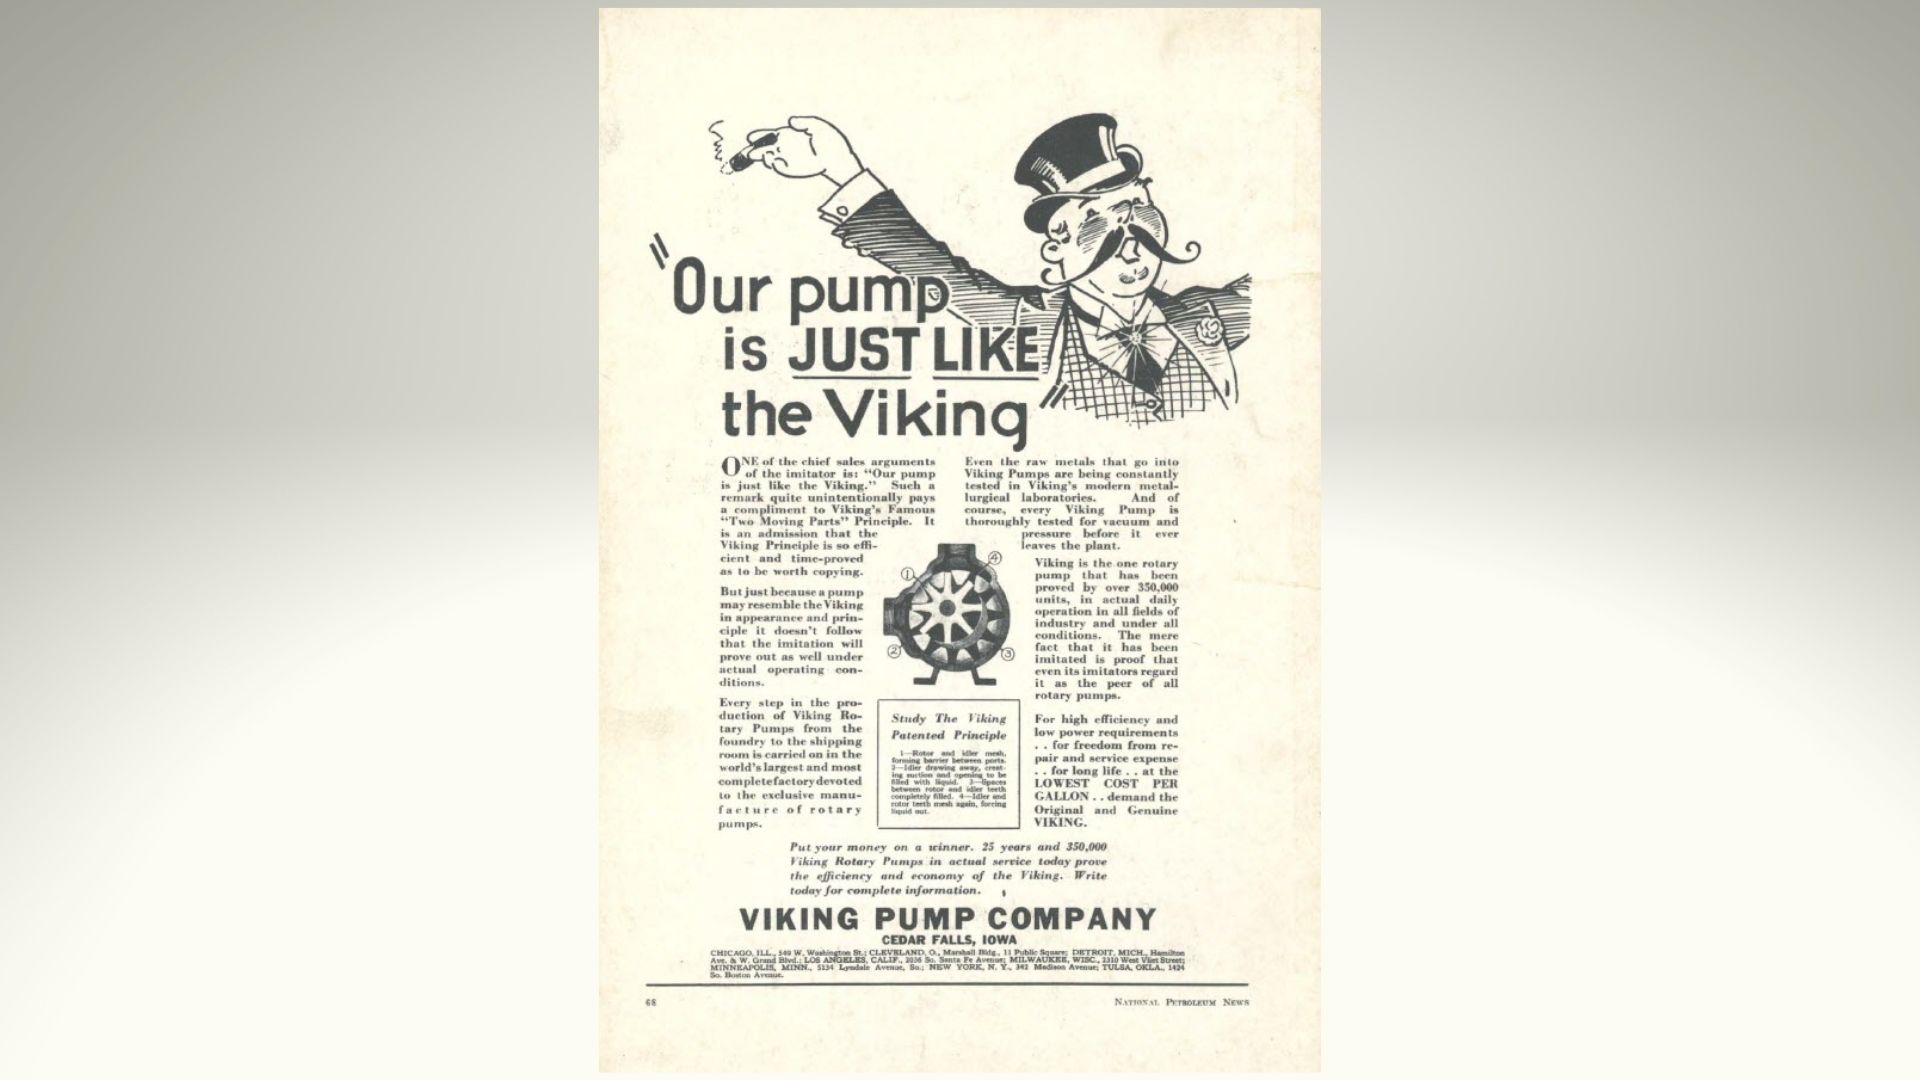 Ad that appeared in National Petroleum Magazine